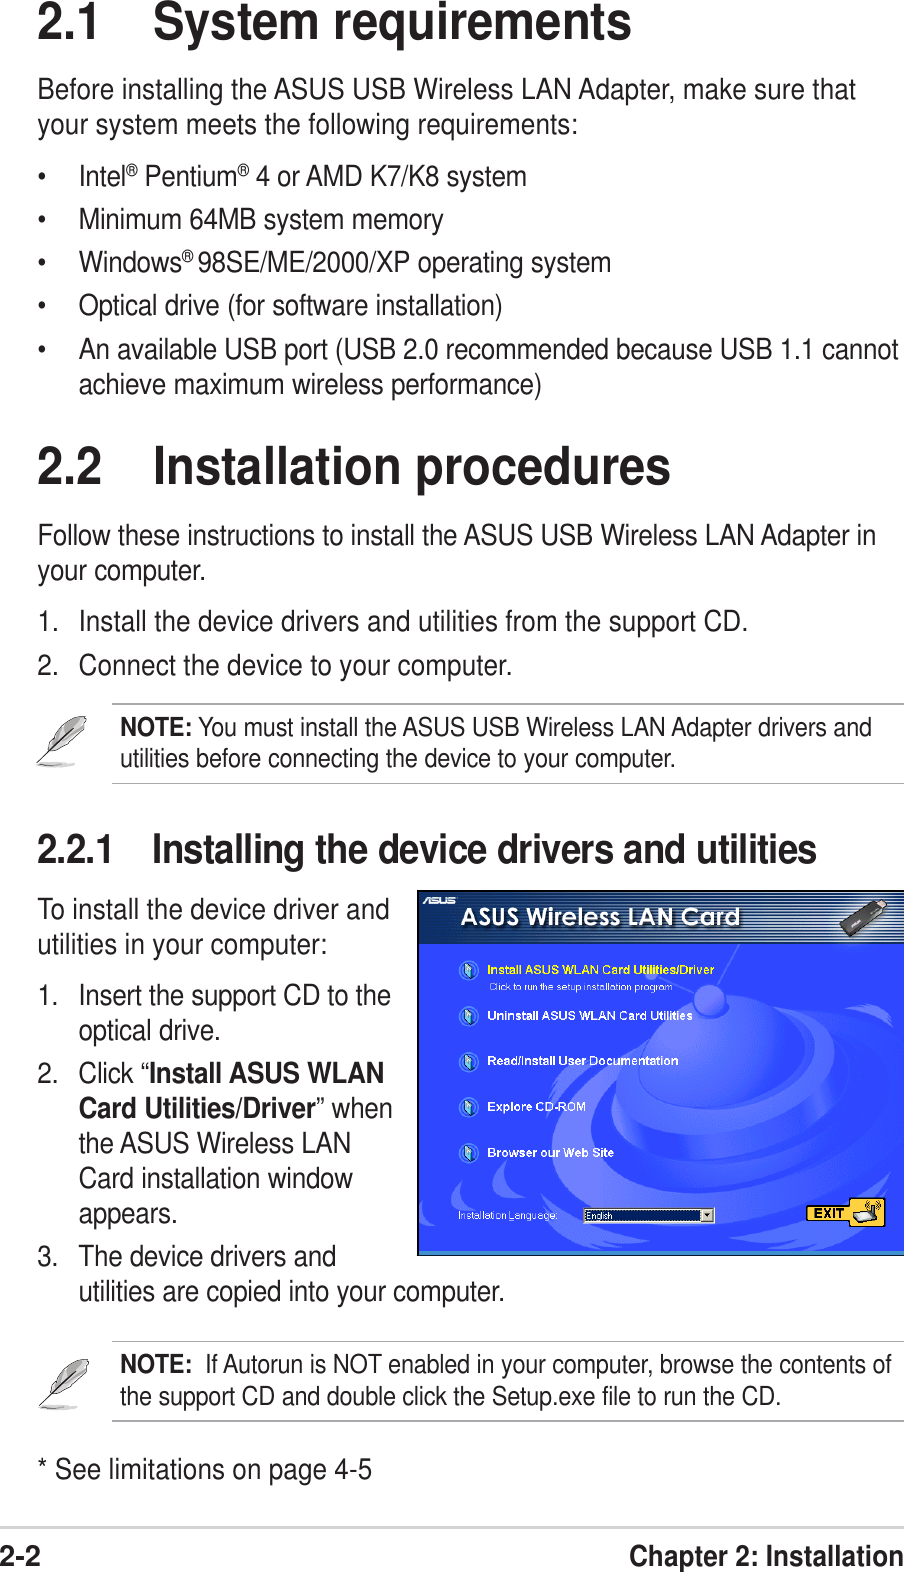 2-2Chapter 2: Installation2.1 System requirementsBefore installing the ASUS USB Wireless LAN Adapter, make sure thatyour system meets the following requirements:• Intel® Pentium® 4 or AMD K7/K8 system• Minimum 64MB system memory• Windows® 98SE/ME/2000/XP operating system• Optical drive (for software installation)• An available USB port (USB 2.0 recommended because USB 1.1 cannotachieve maximum wireless performance)2.2.1 Installing the device drivers and utilitiesTo install the device driver andutilities in your computer:1. Insert the support CD to theoptical drive.2. Click “Install ASUS WLANCard Utilities/Driver” whenthe ASUS Wireless LANCard installation windowappears.3. The device drivers andutilities are copied into your computer.NOTE:  If Autorun is NOT enabled in your computer, browse the contents ofthe support CD and double click the Setup.exe file to run the CD.2.2 Installation proceduresFollow these instructions to install the ASUS USB Wireless LAN Adapter inyour computer.1. Install the device drivers and utilities from the support CD.2. Connect the device to your computer.NOTE: You must install the ASUS USB Wireless LAN Adapter drivers andutilities before connecting the device to your computer.* See limitations on page 4-5